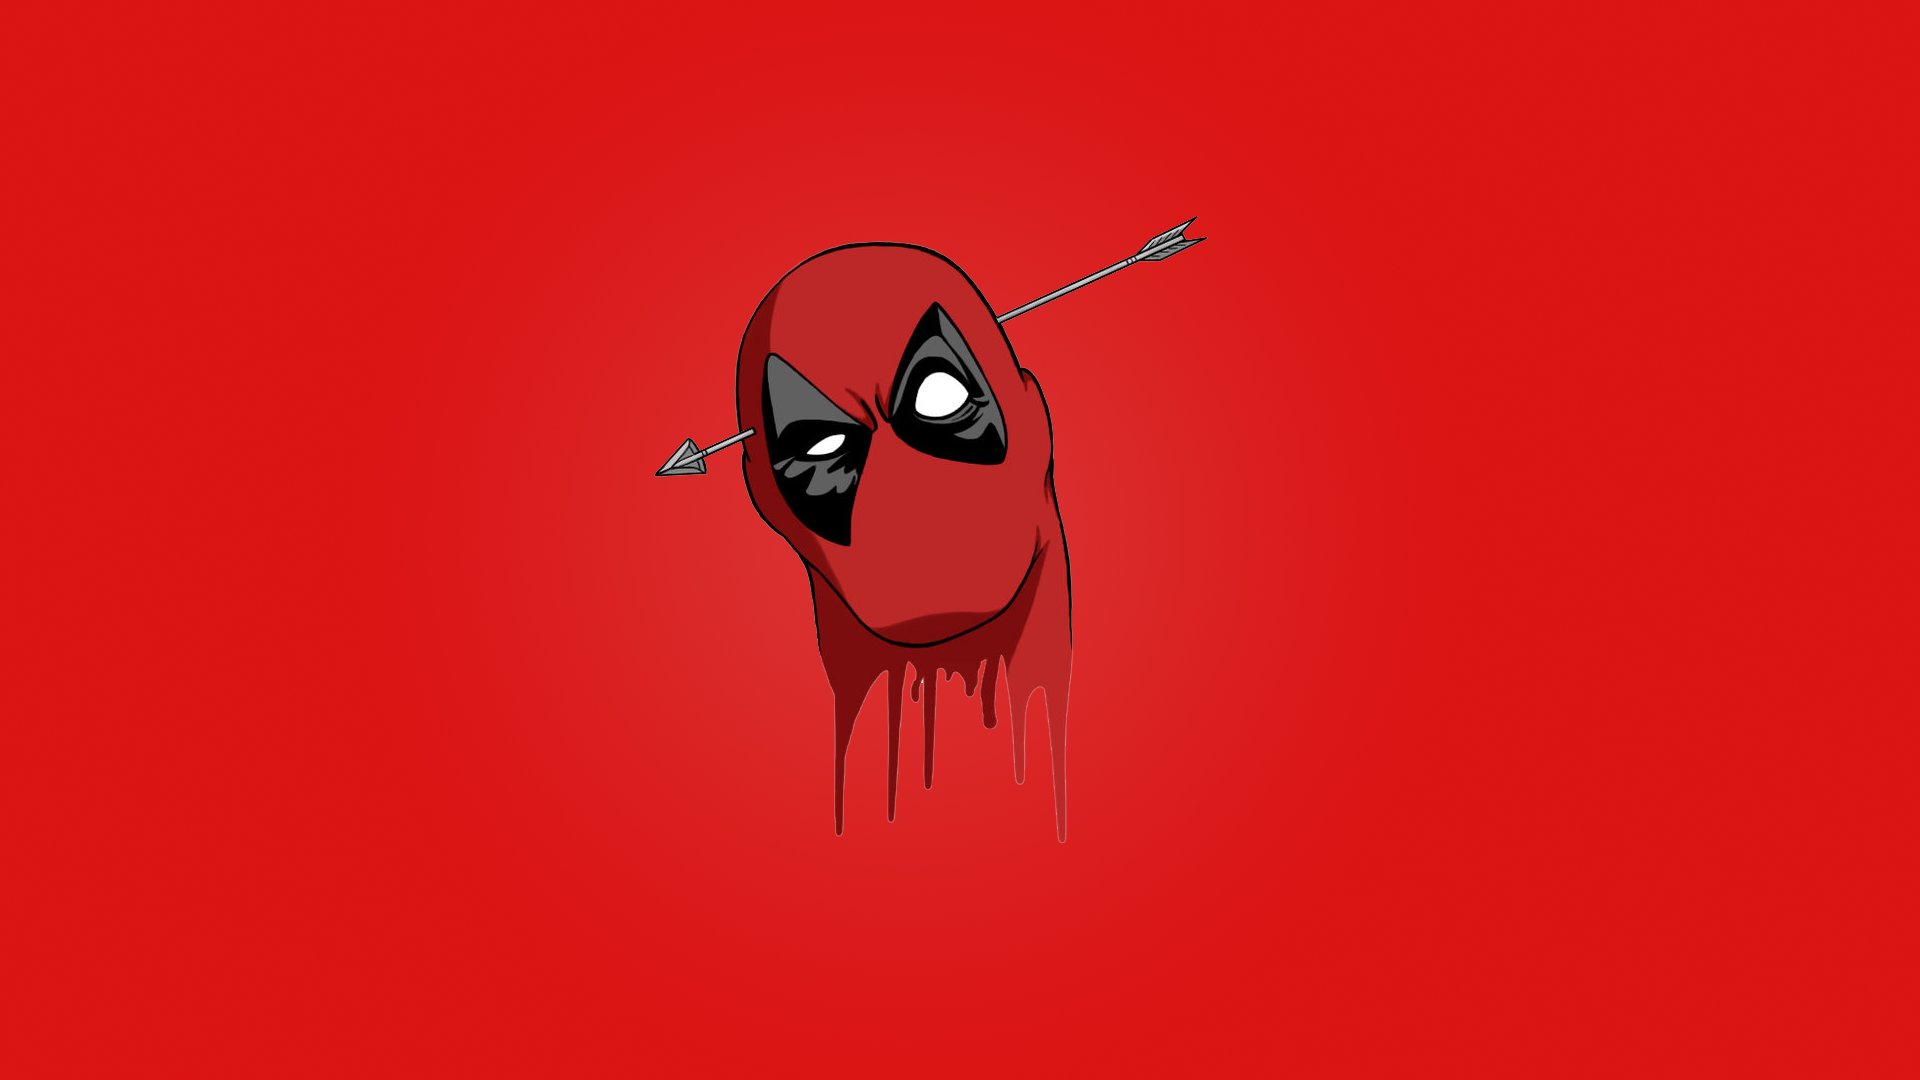 Deadpool Antiheroes Arrows Design Red Background Simple Background 1920x1080